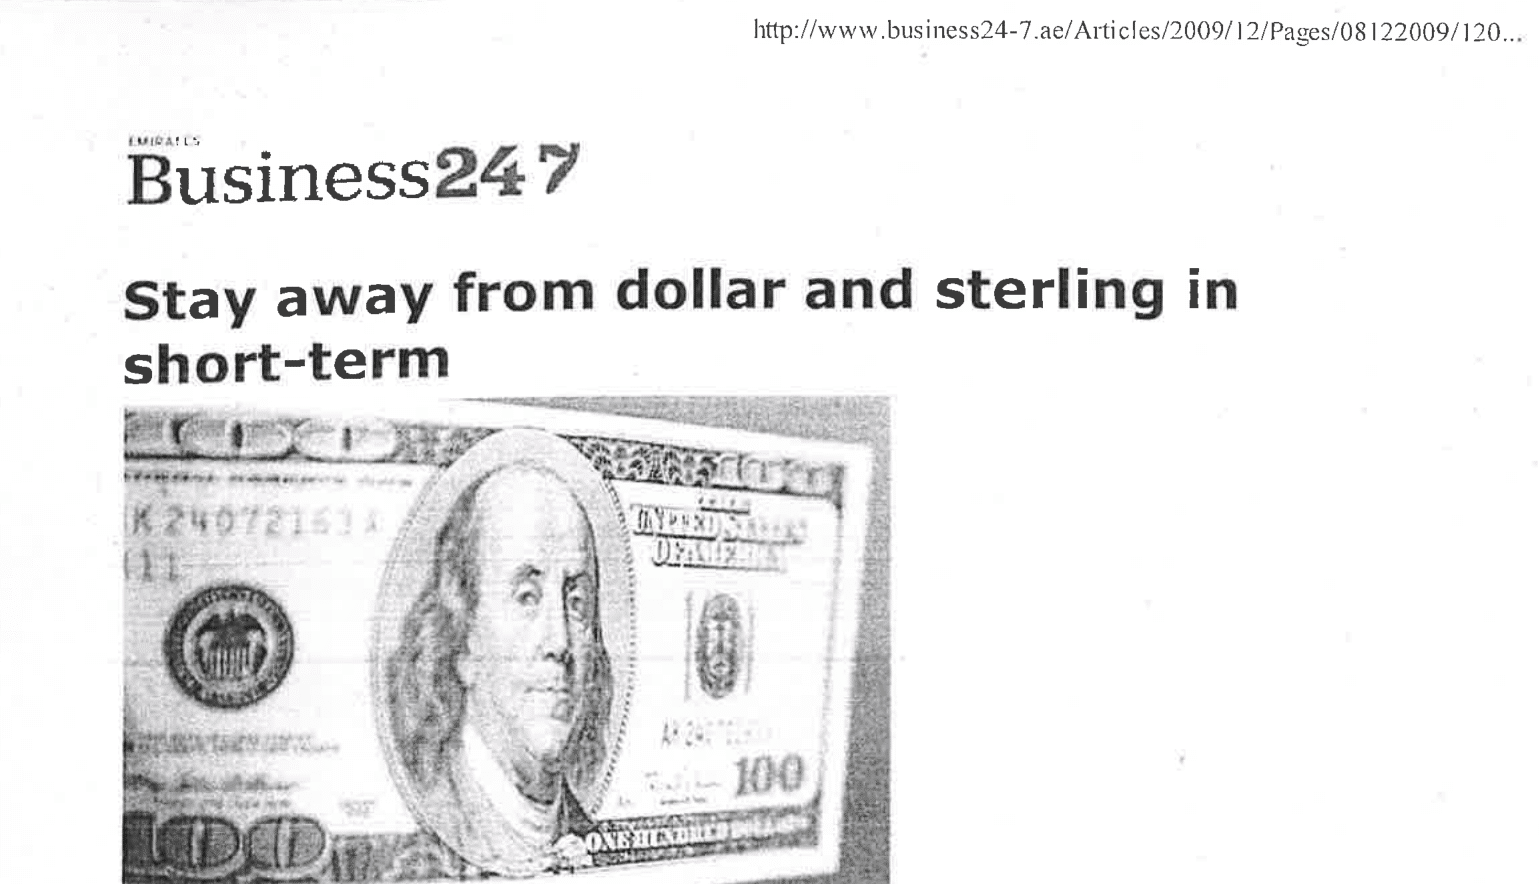 Stay away from dollar and sterling in short-term